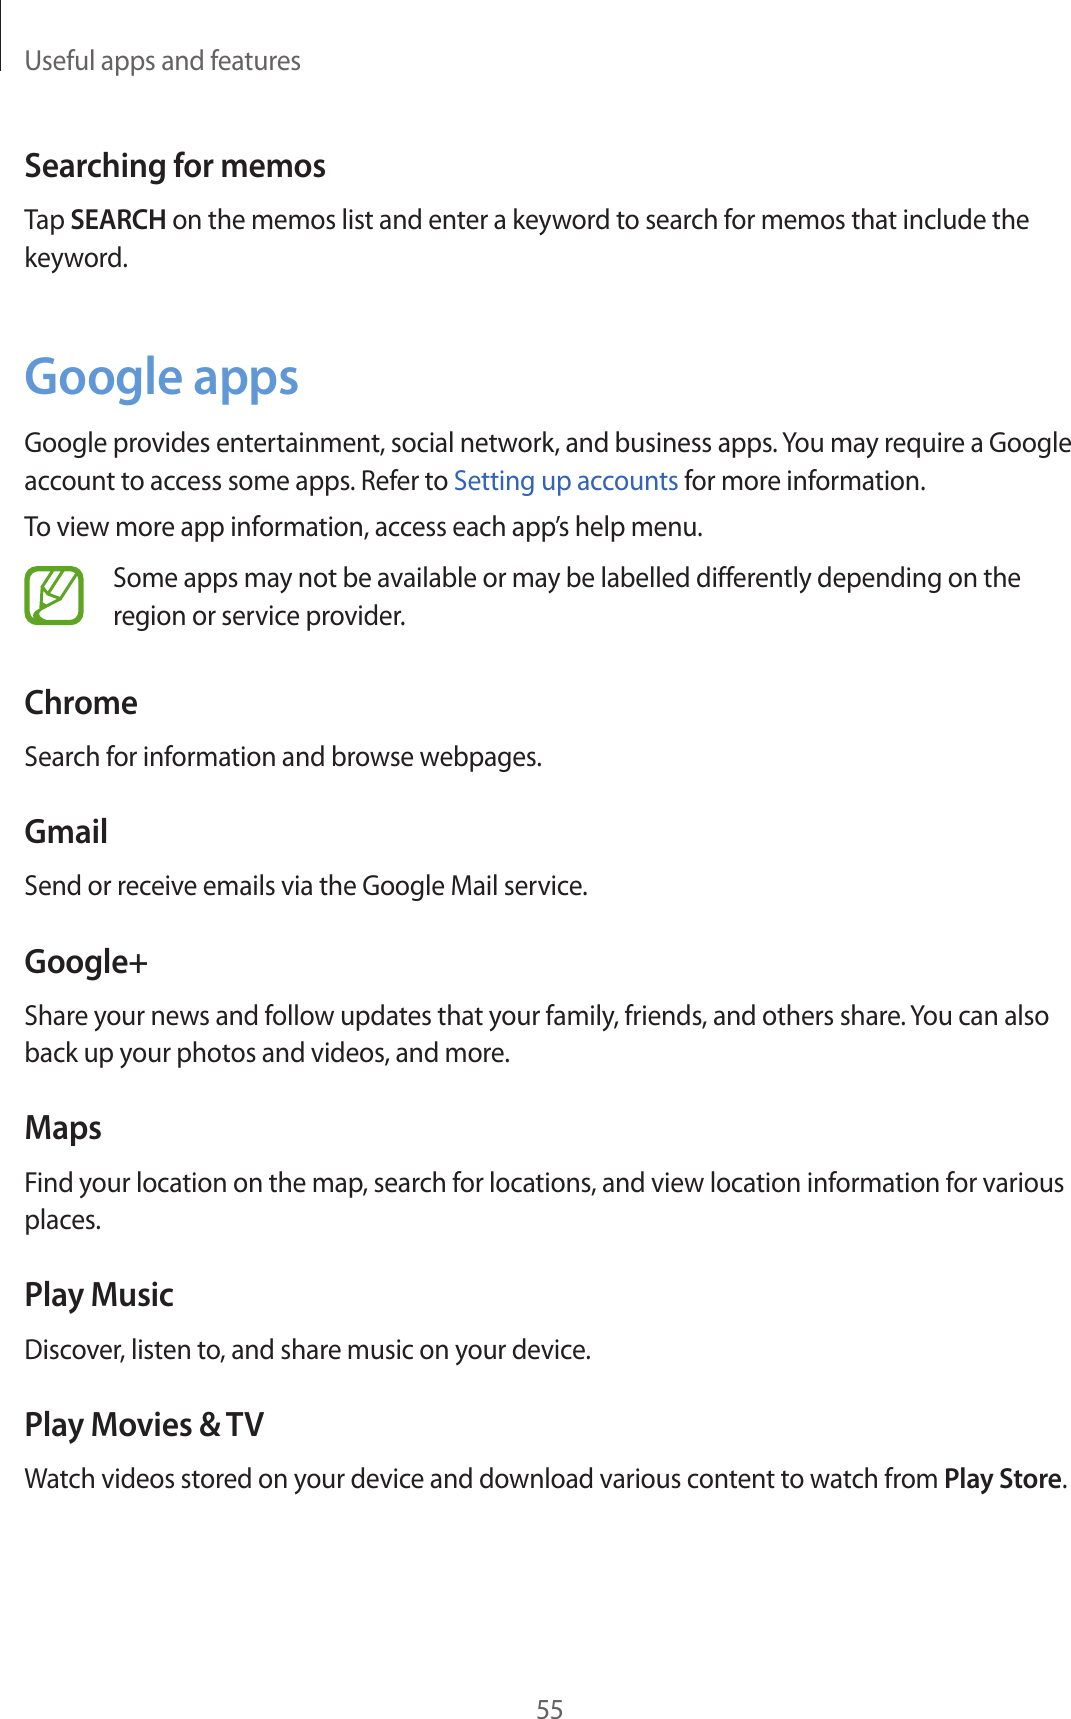 Useful apps and features55Searching for memosTap SEARCH on the memos list and enter a keyword to search for memos that include the keyword.Google appsGoogle provides entertainment, social network, and business apps. You may require a Google account to access some apps. Refer to Setting up accounts for more information.To view more app information, access each app’s help menu.Some apps may not be available or may be labelled differently depending on the region or service provider.ChromeSearch for information and browse webpages.GmailSend or receive emails via the Google Mail service.Google+Share your news and follow updates that your family, friends, and others share. You can also back up your photos and videos, and more.MapsFind your location on the map, search for locations, and view location information for various places.Play MusicDiscover, listen to, and share music on your device.Play Movies &amp; TVWatch videos stored on your device and download various content to watch from Play Store.